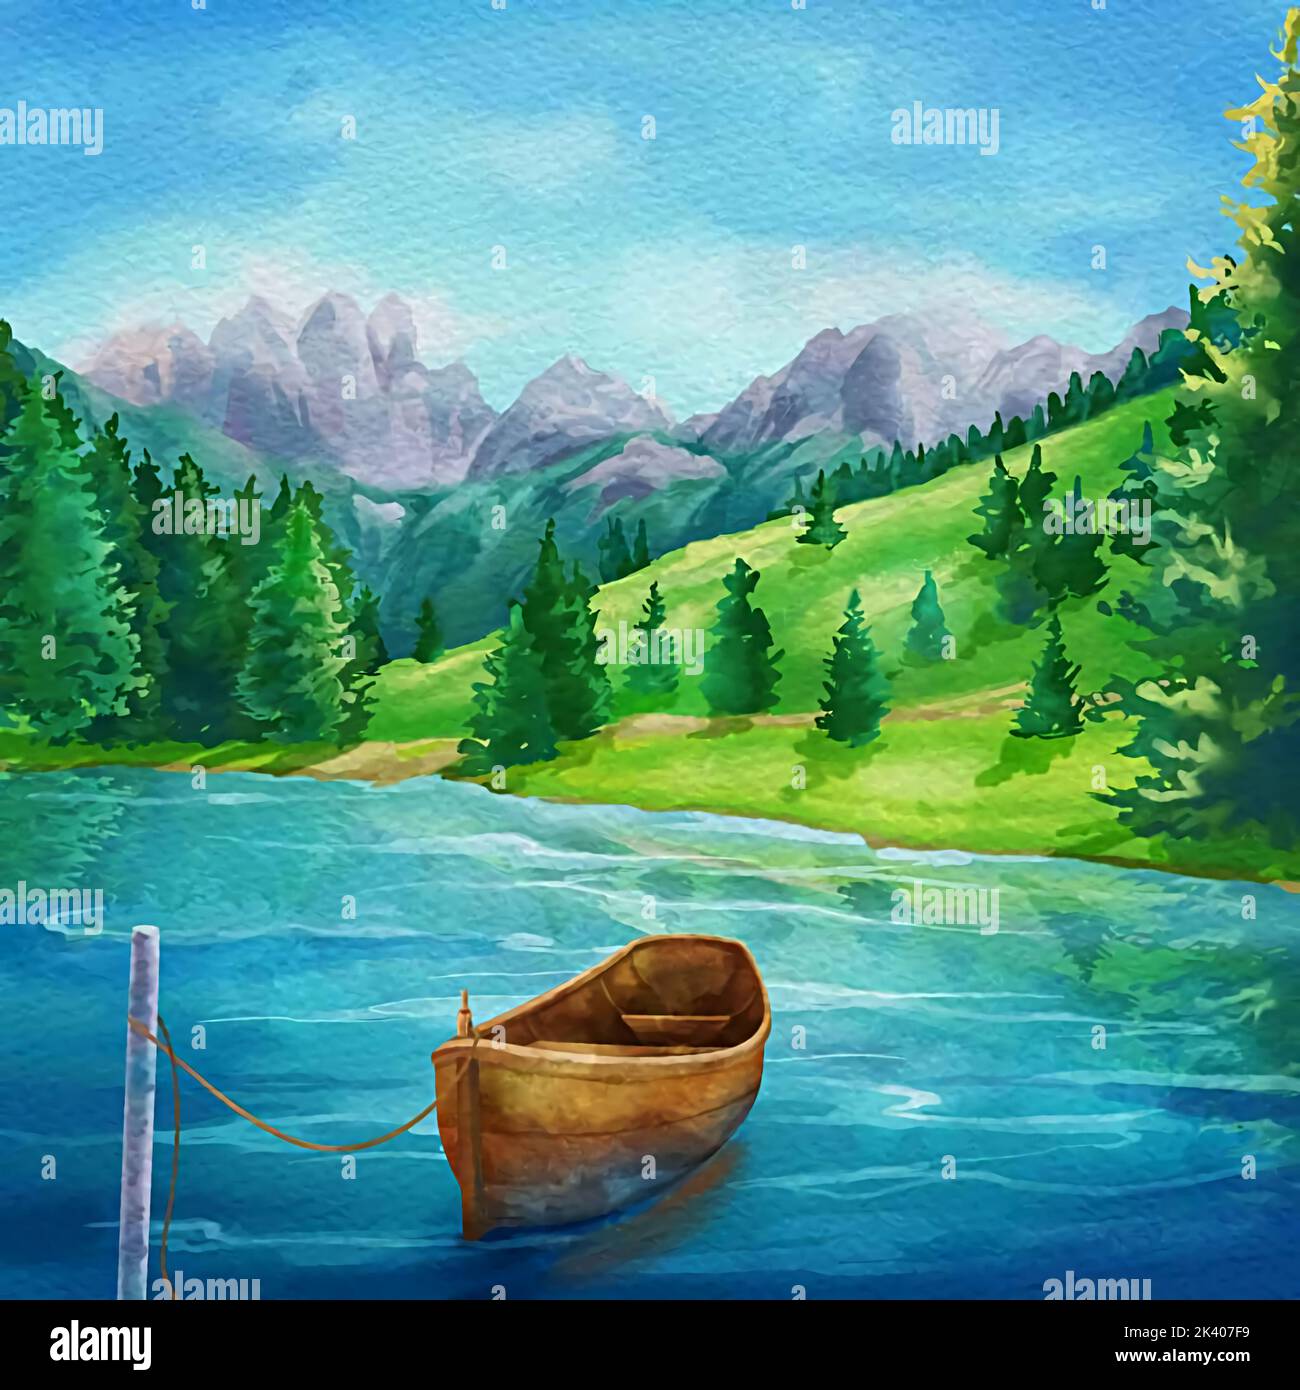 picture of a boat on a lake with a natural landscape, trees and mountains in the background Stock Photo